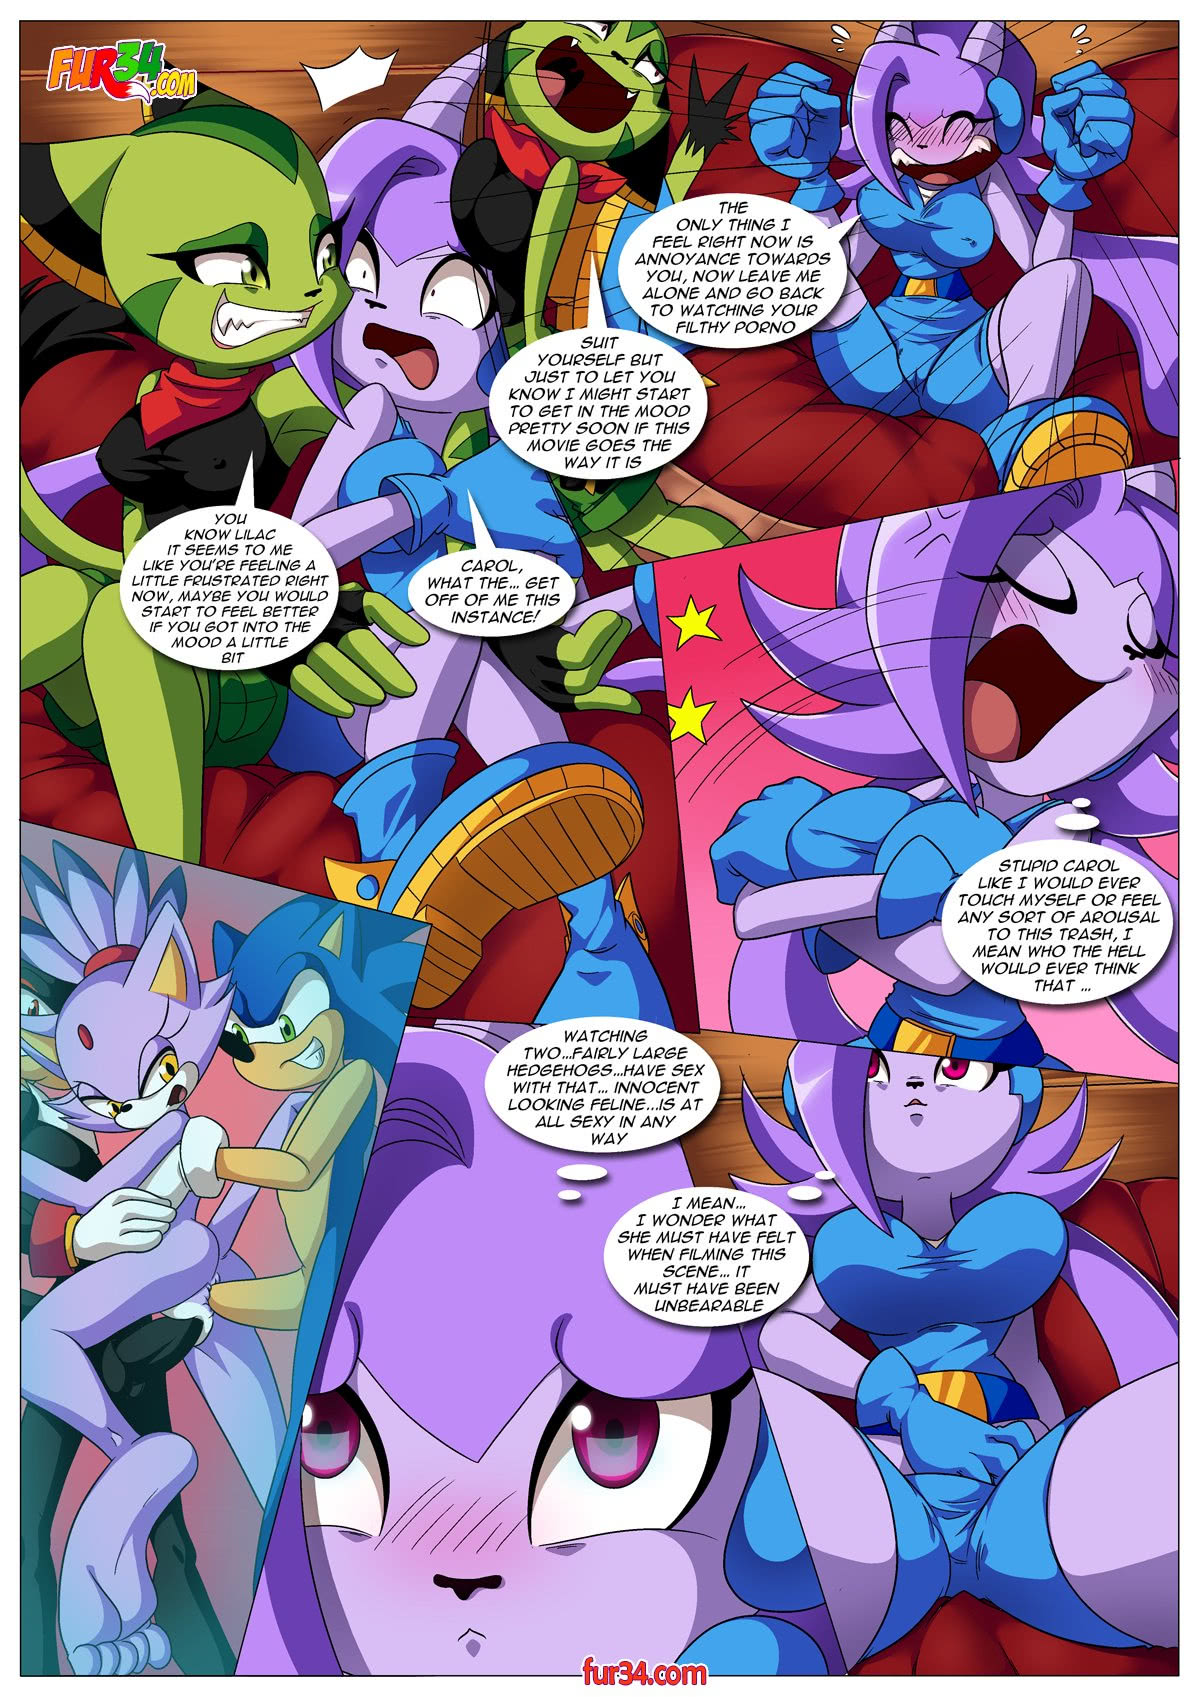 Watching A Movie With Friends - Page 5